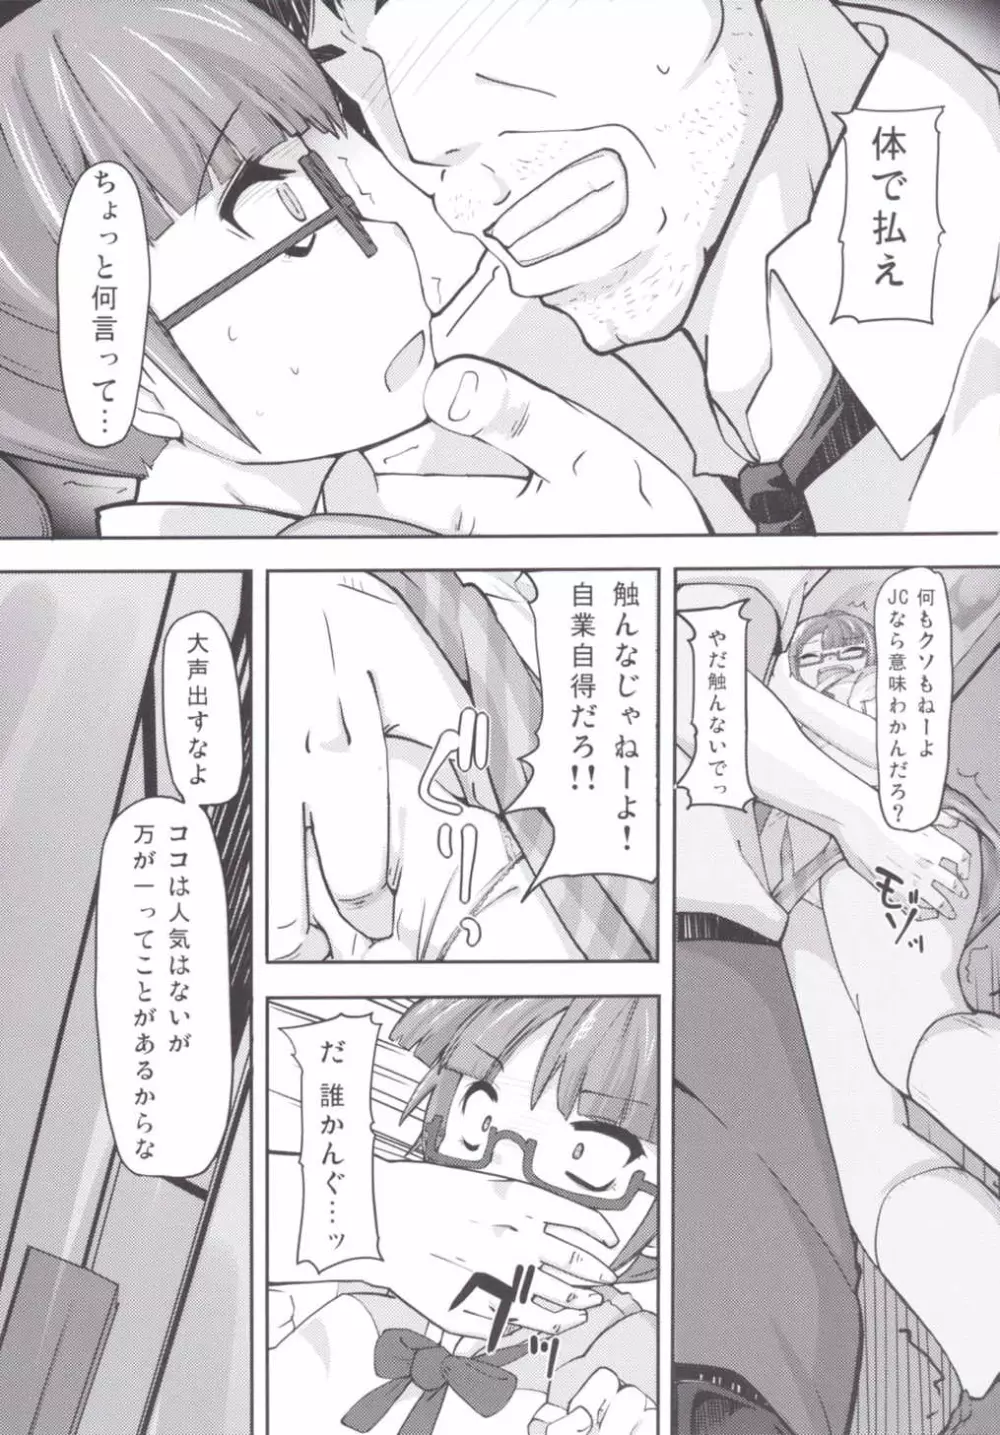 Letsハメパラ! - page6